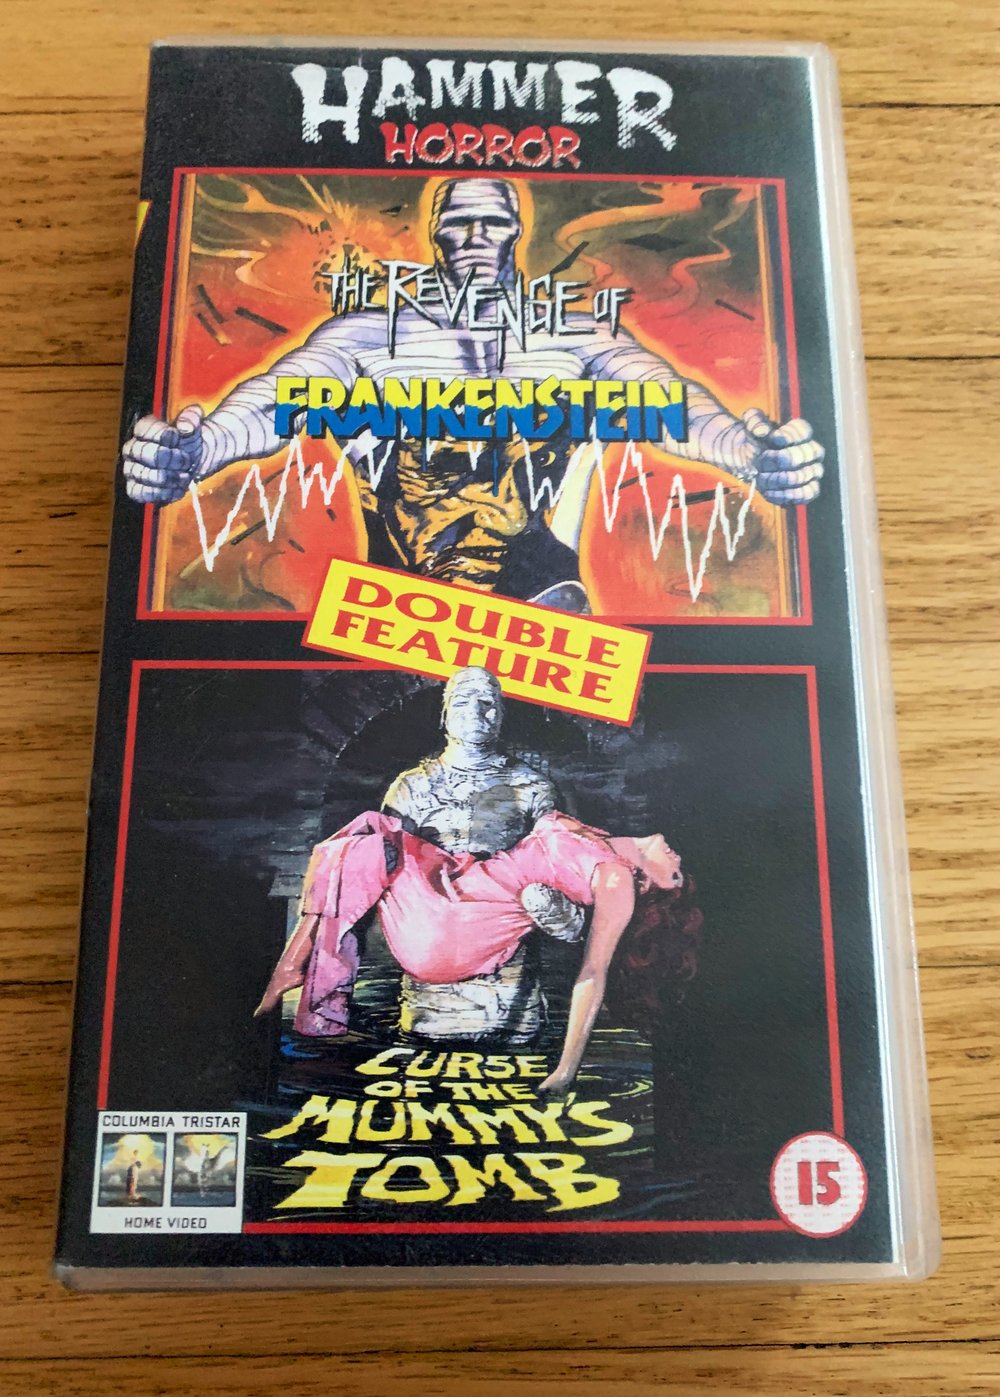 Hammer Horror Double Feature: THE REVENGE OF FRANKENSTEIN and CURSE OF THE MUMMY'S TOMB VHS